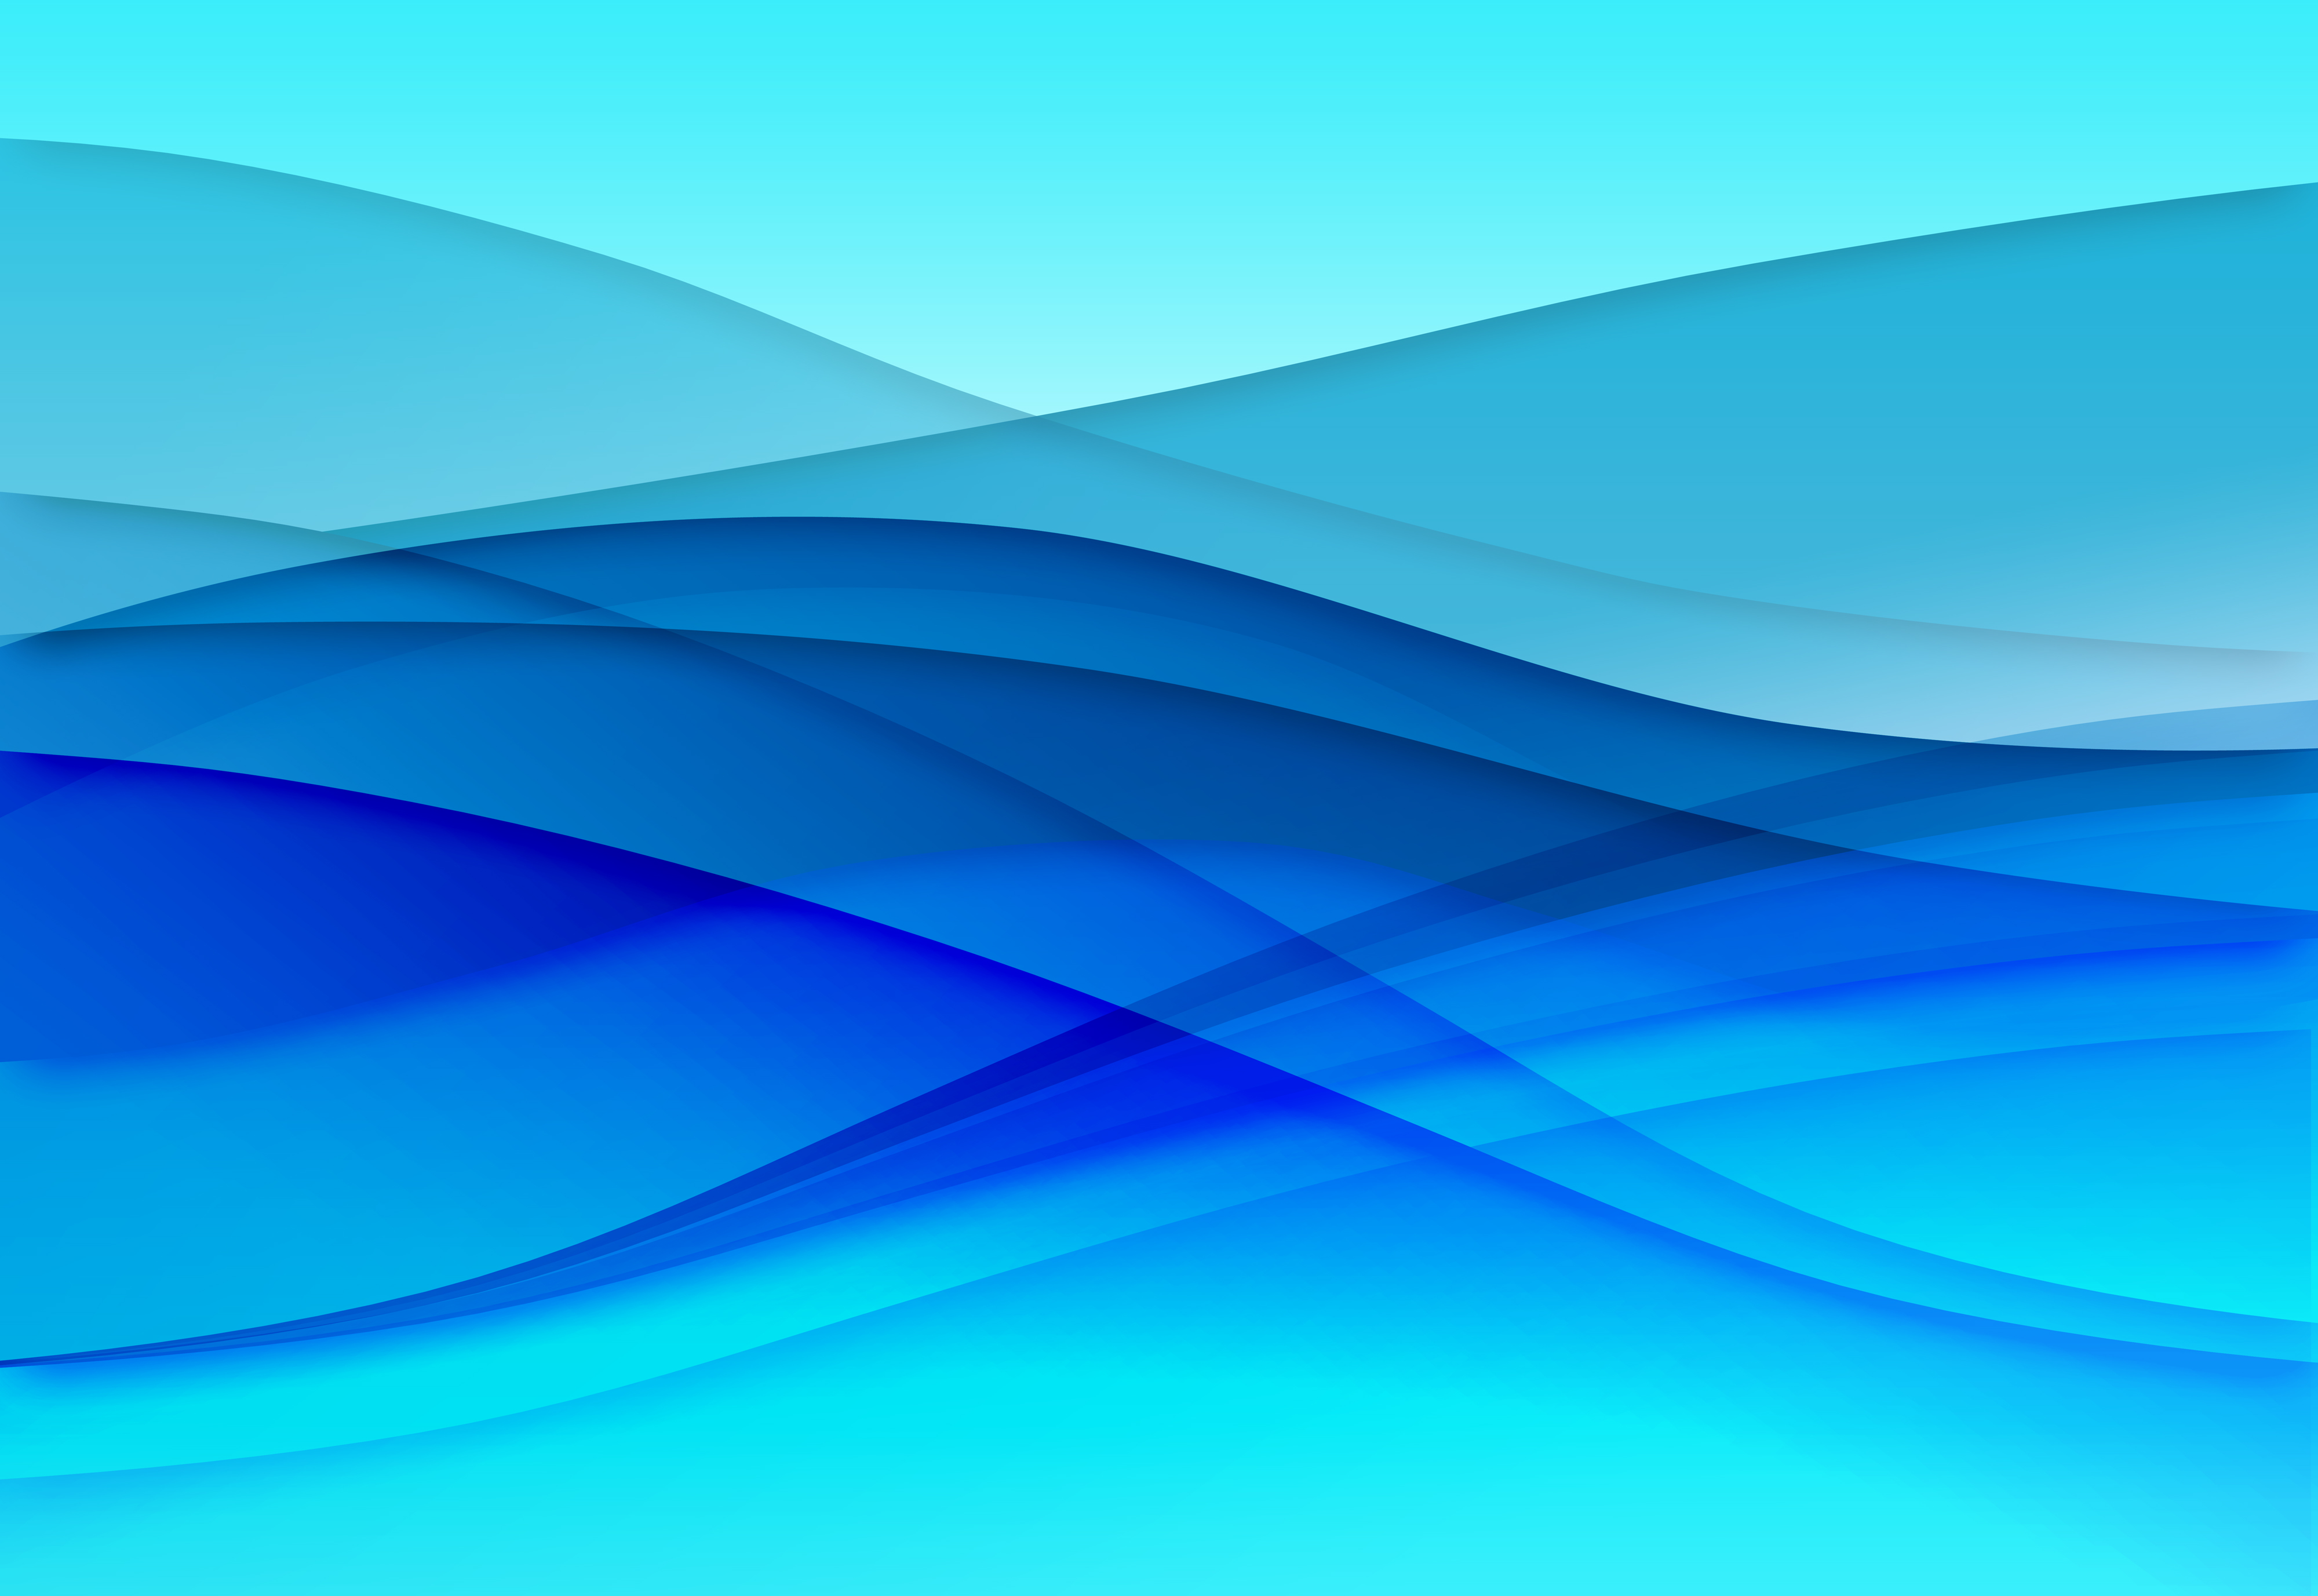 Tutorial: Flowing Blue Waves and Curves Graphic Design | Super Cass